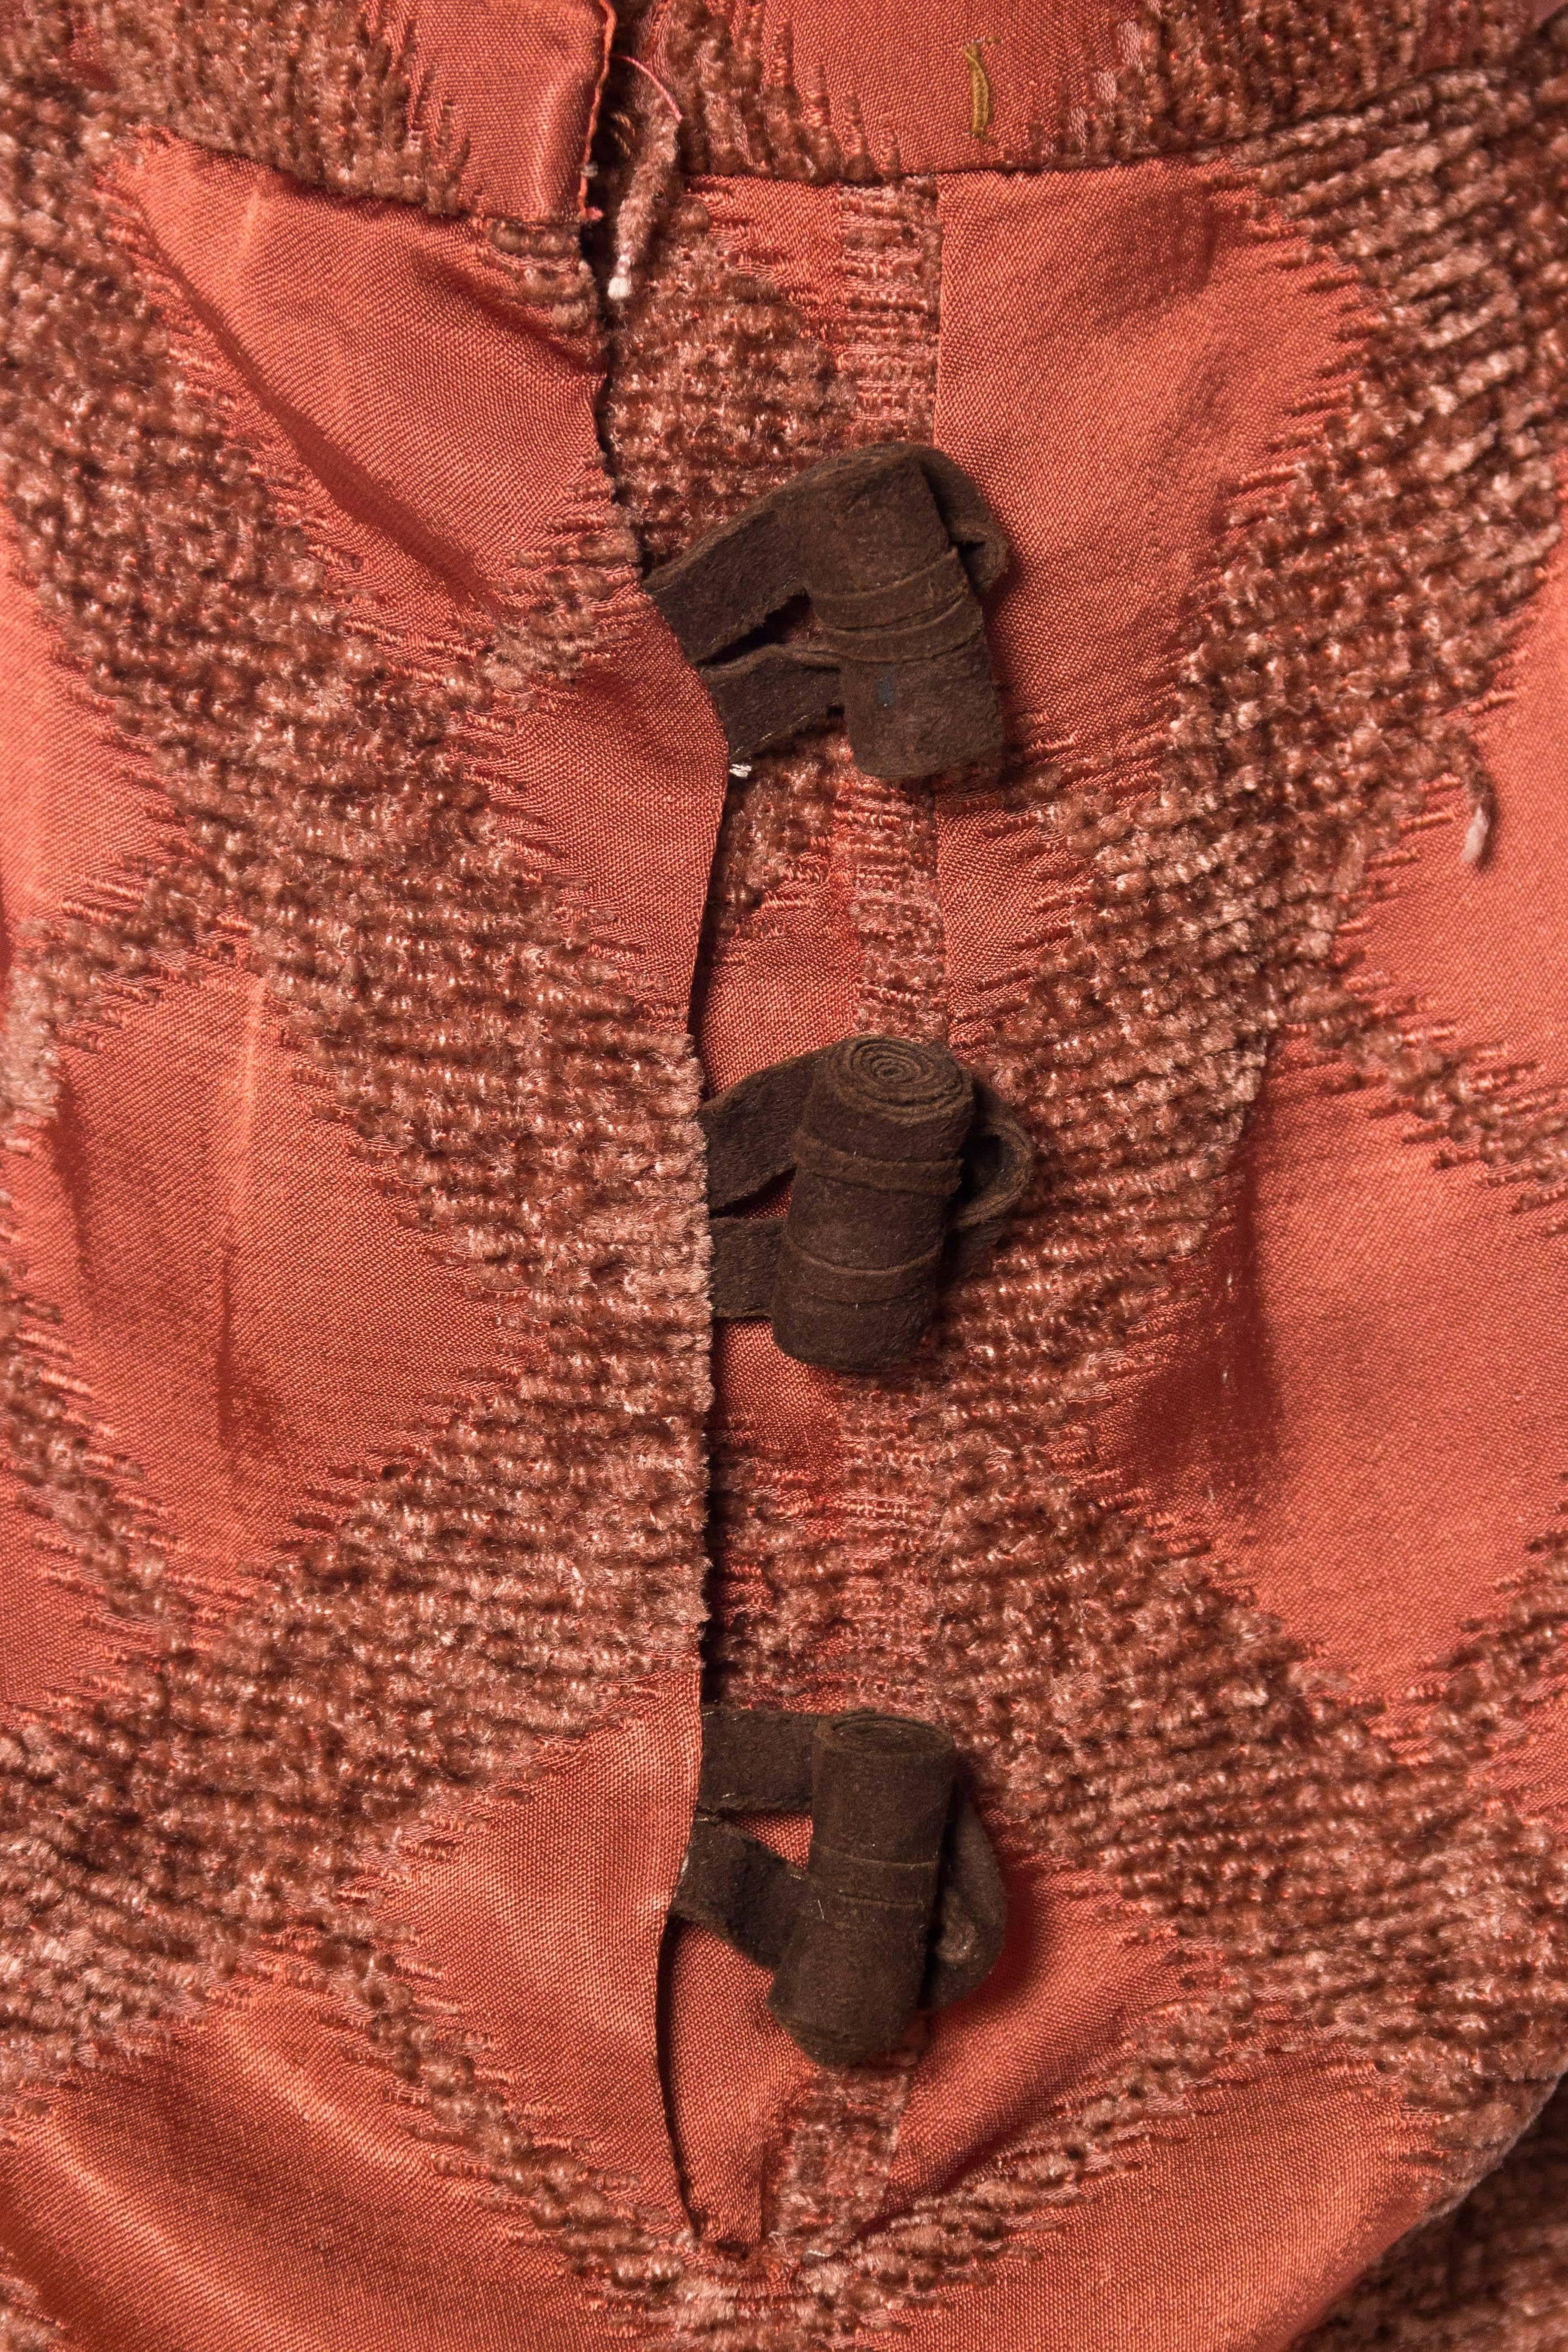 1930S Russet Brown Rayon Blend Satin & Chenille Harem Pants With Leather Toggles 3